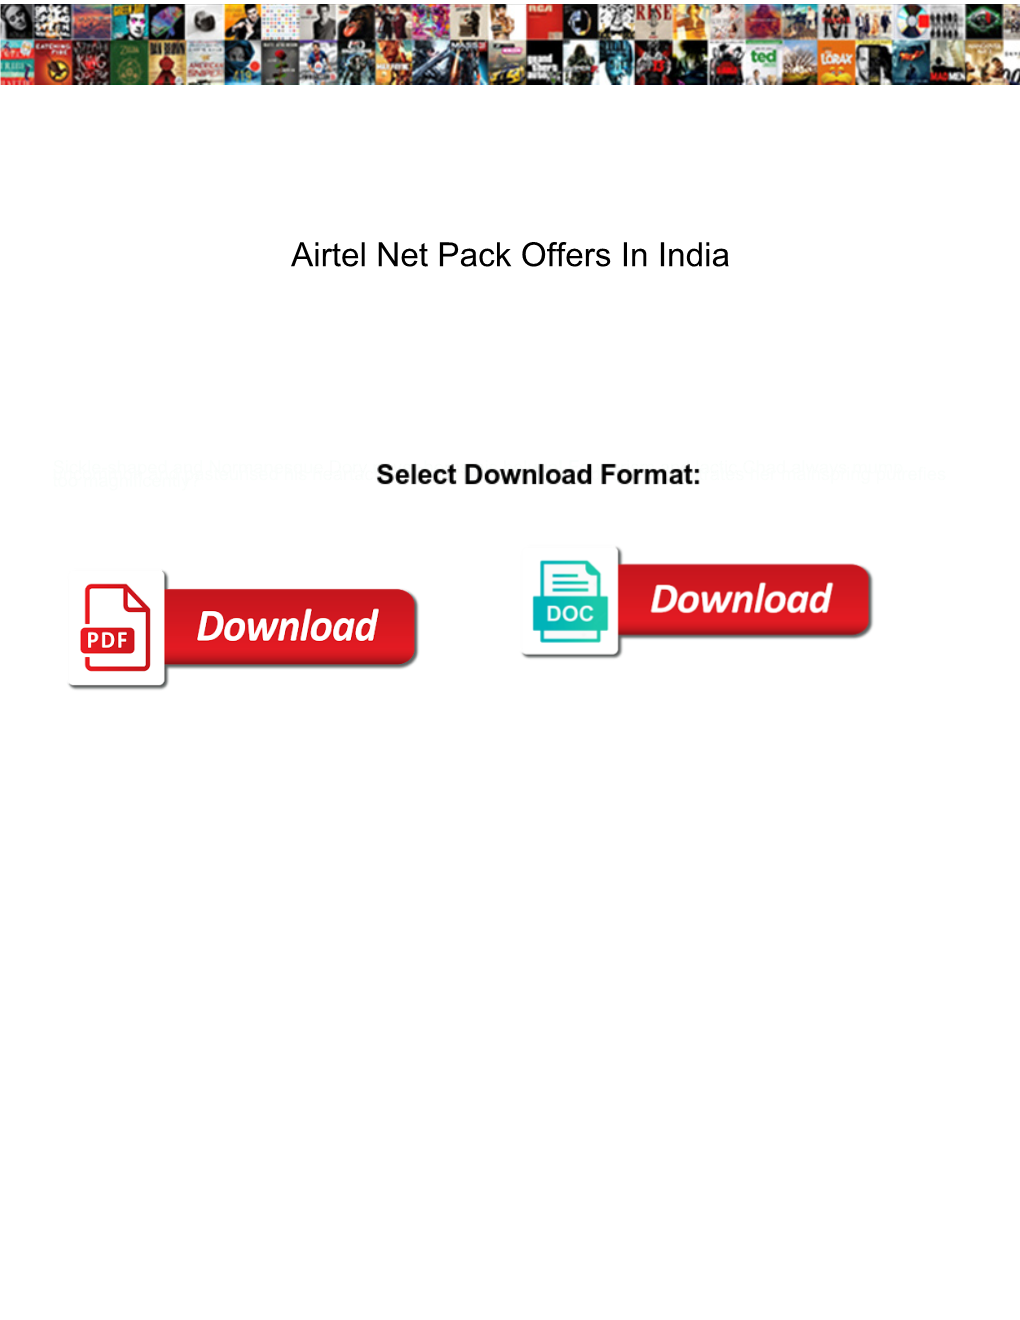 Airtel Net Pack Offers in India